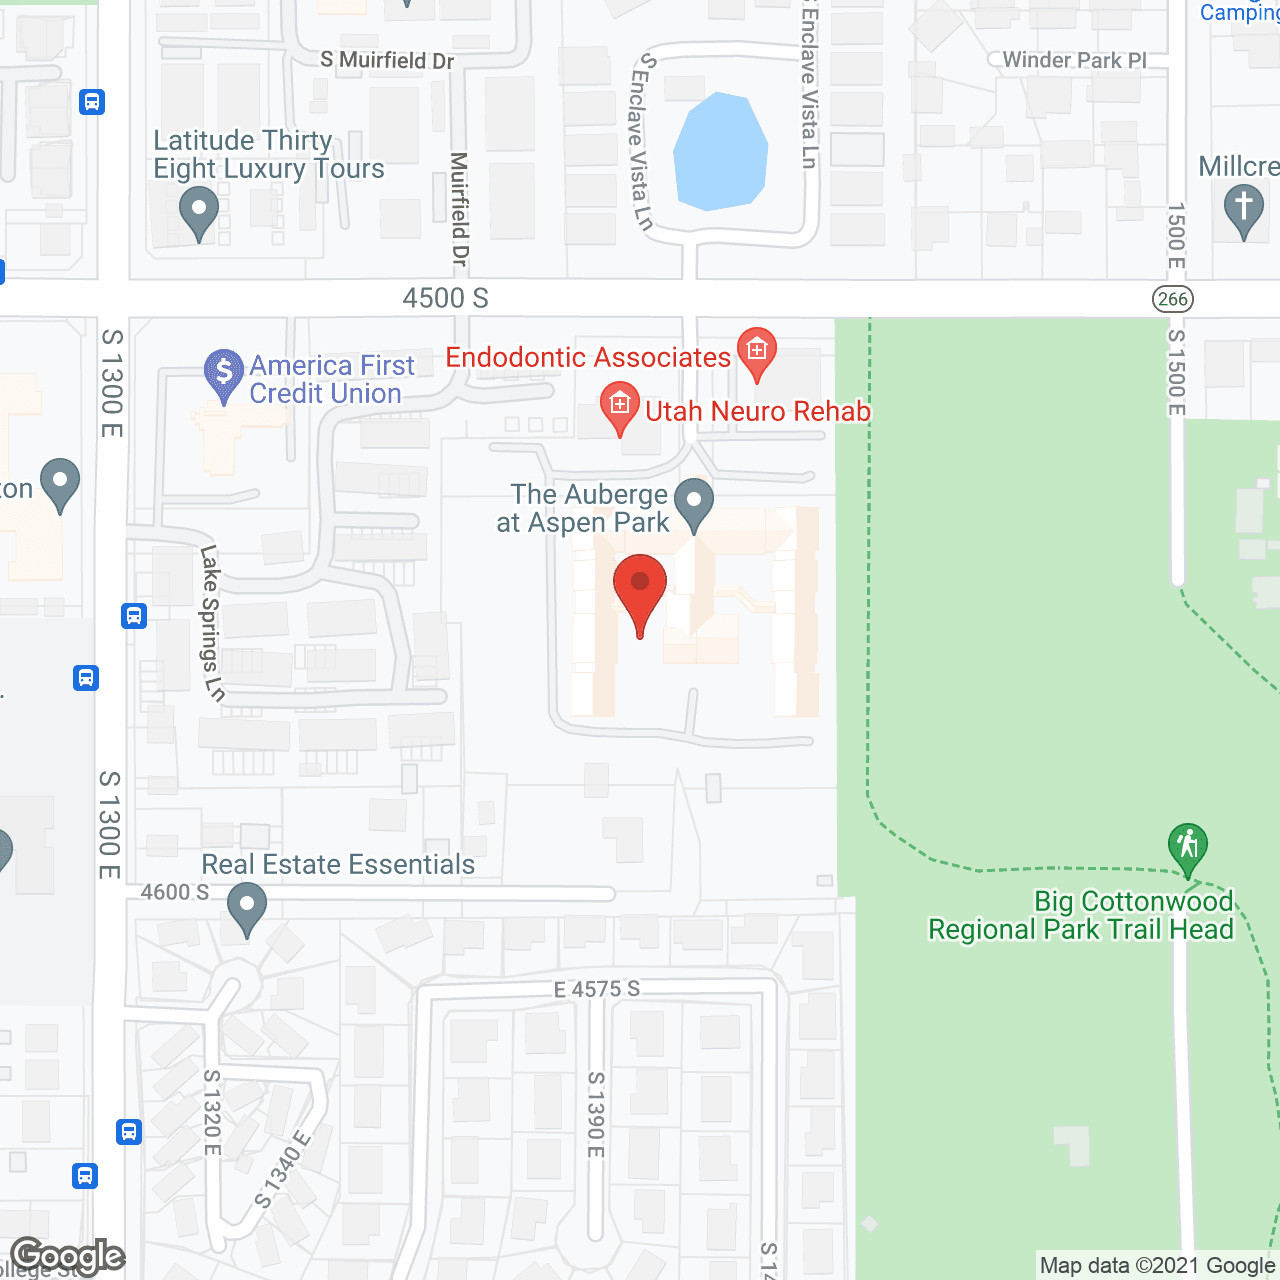 The Auberge at Aspen Park in google map